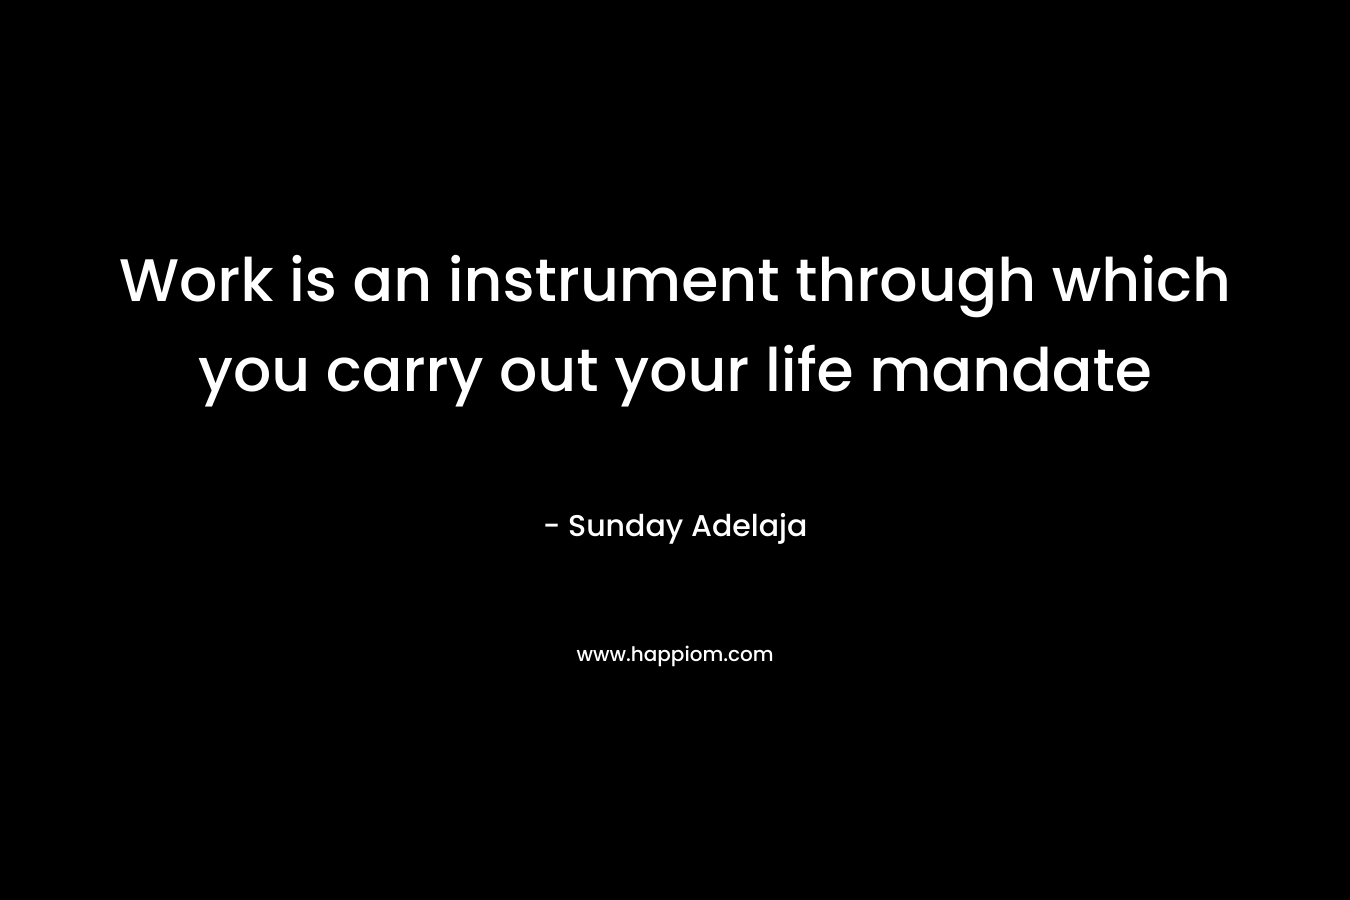 Work is an instrument through which you carry out your life mandate